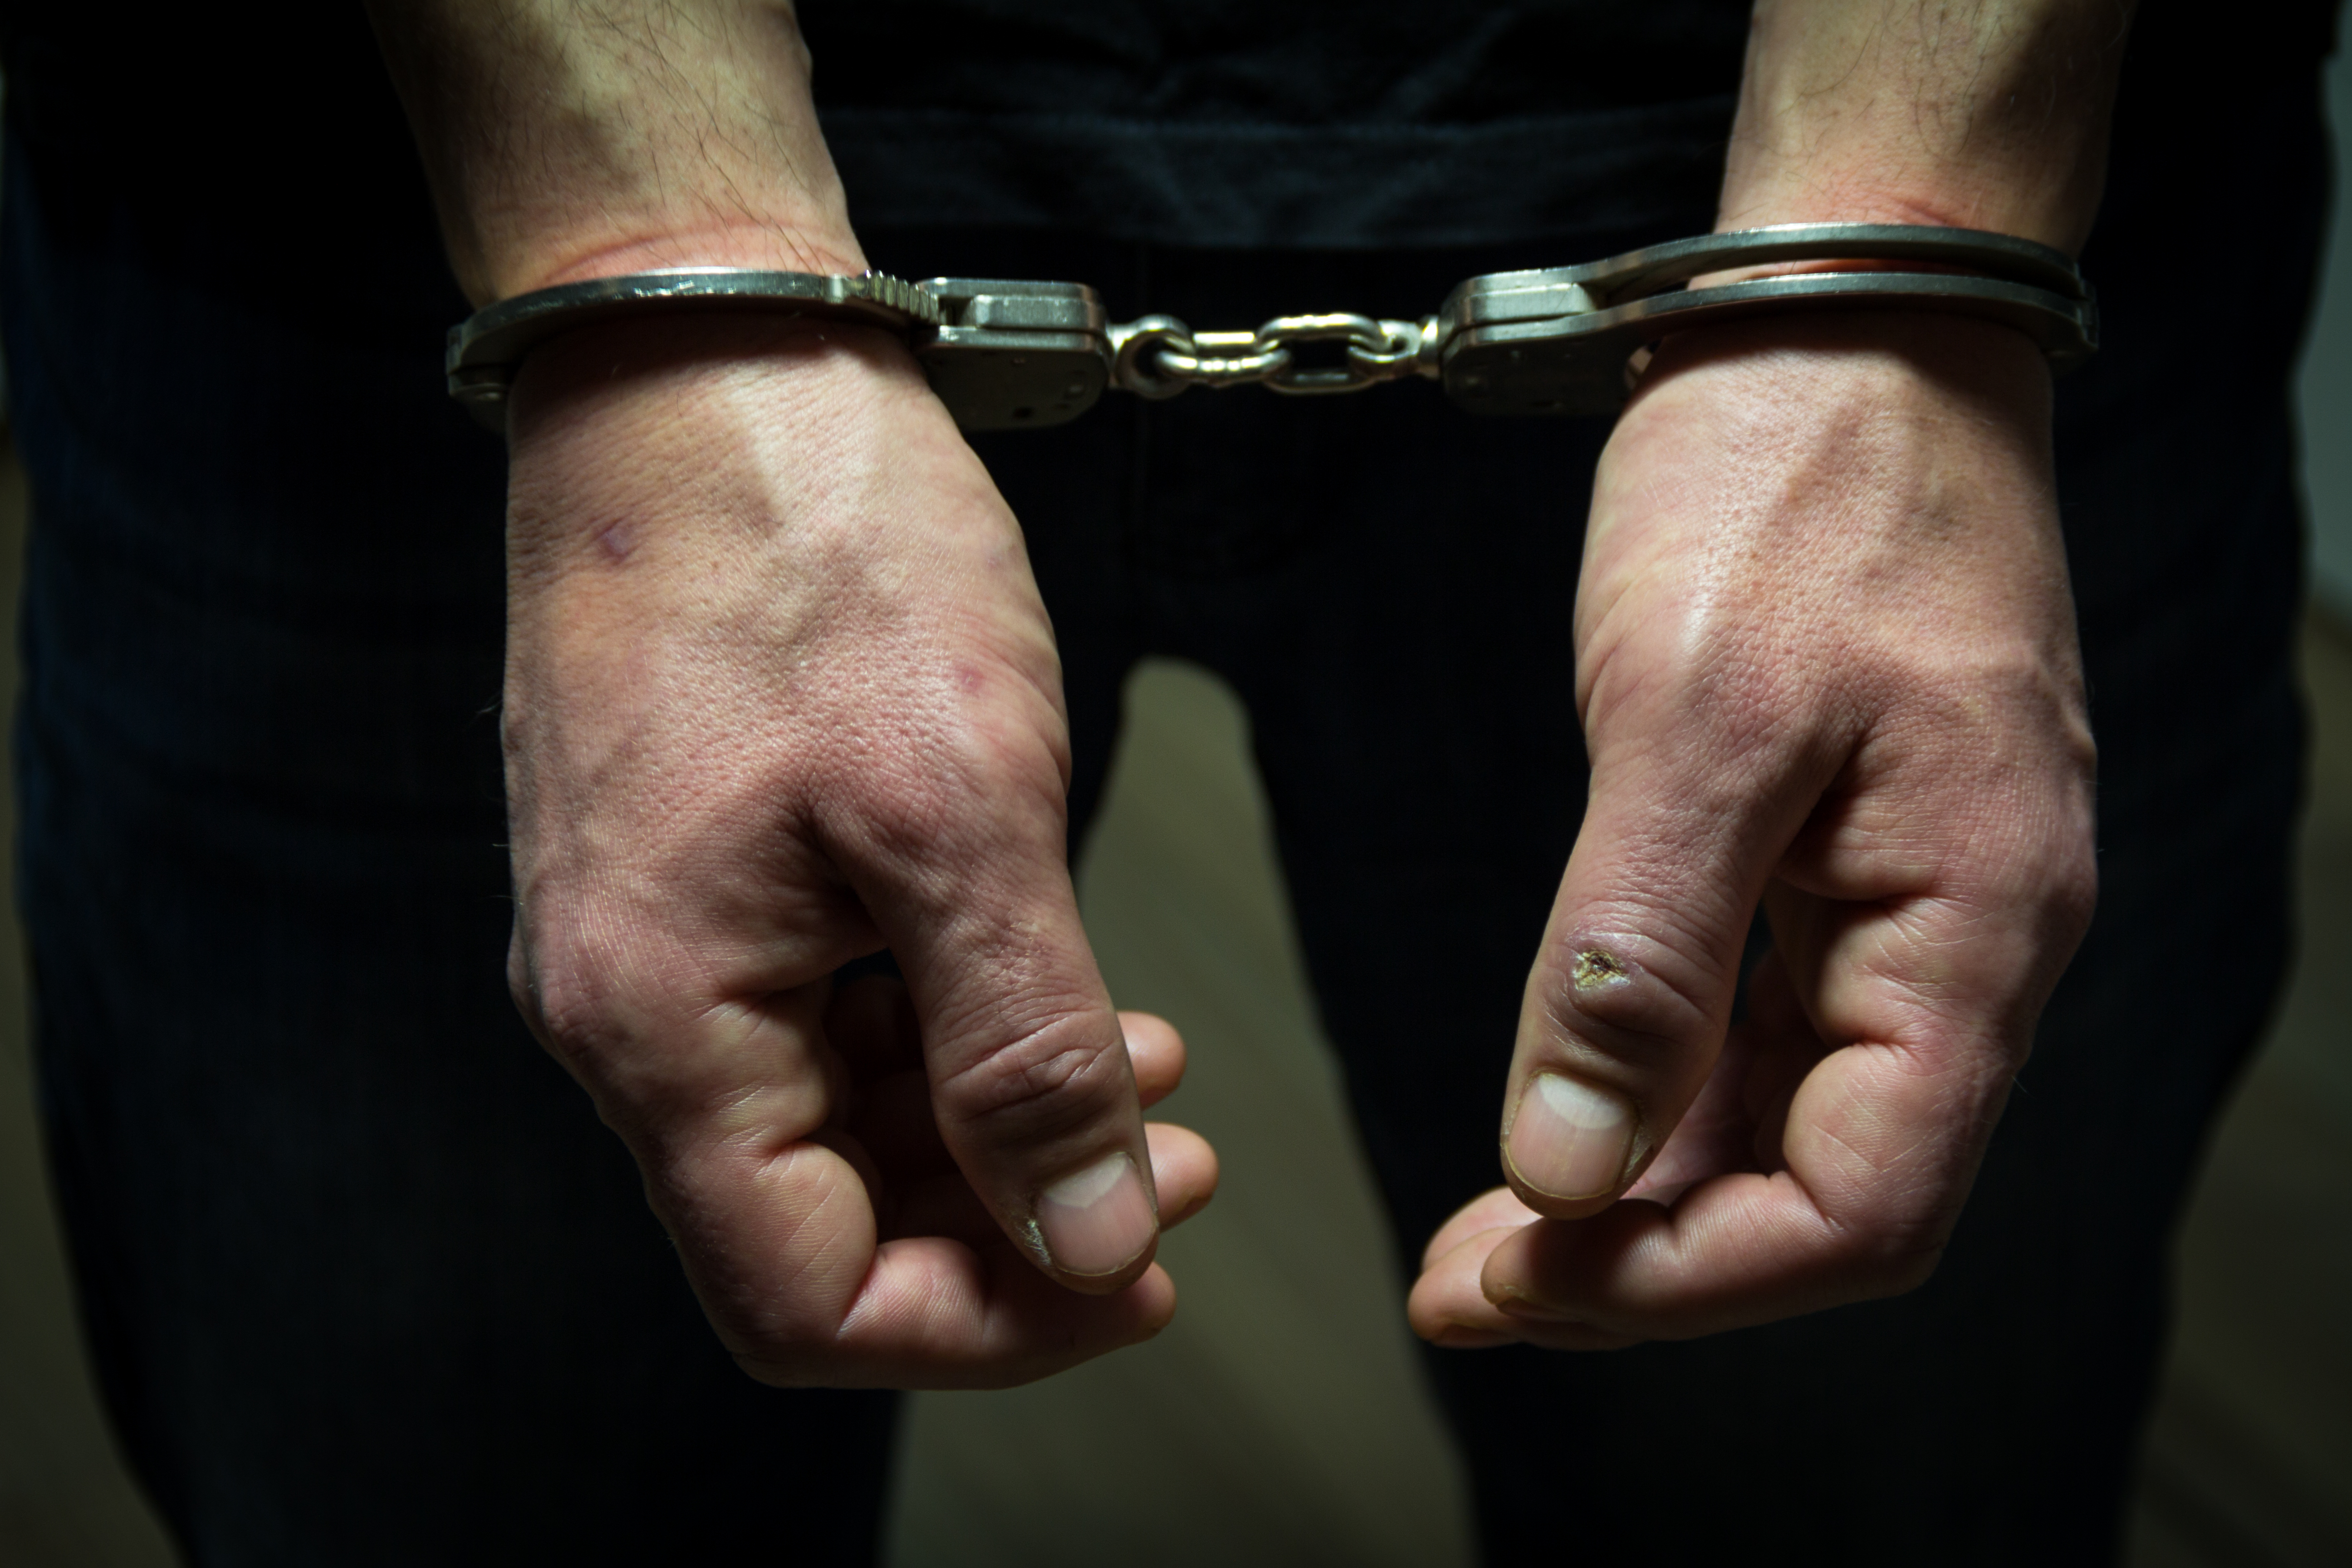 The arrested criminal handcuffed. Hands with handcuffs in the front | Source: Shutterstock